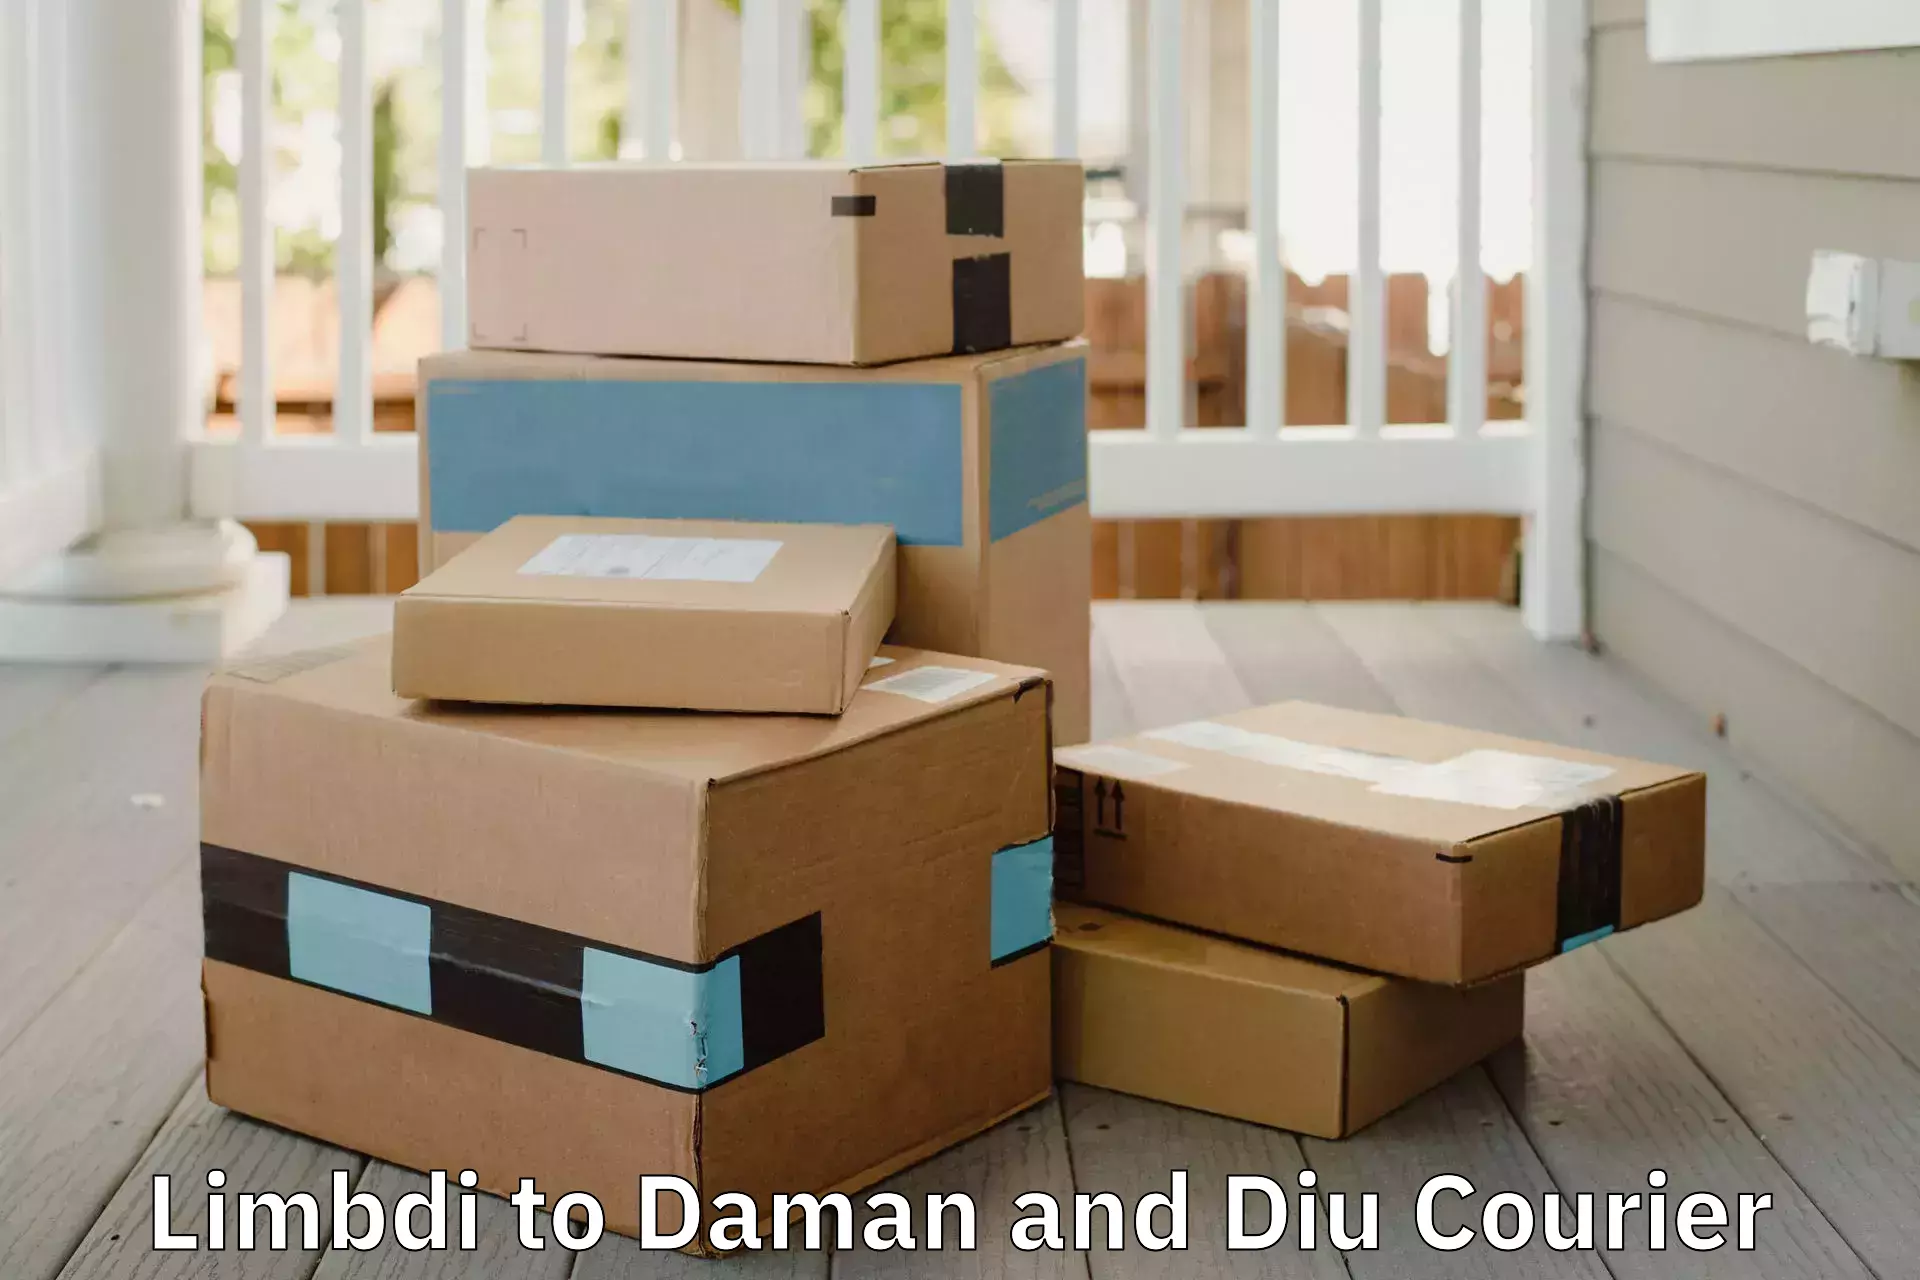 Quality moving and storage Limbdi to Diu